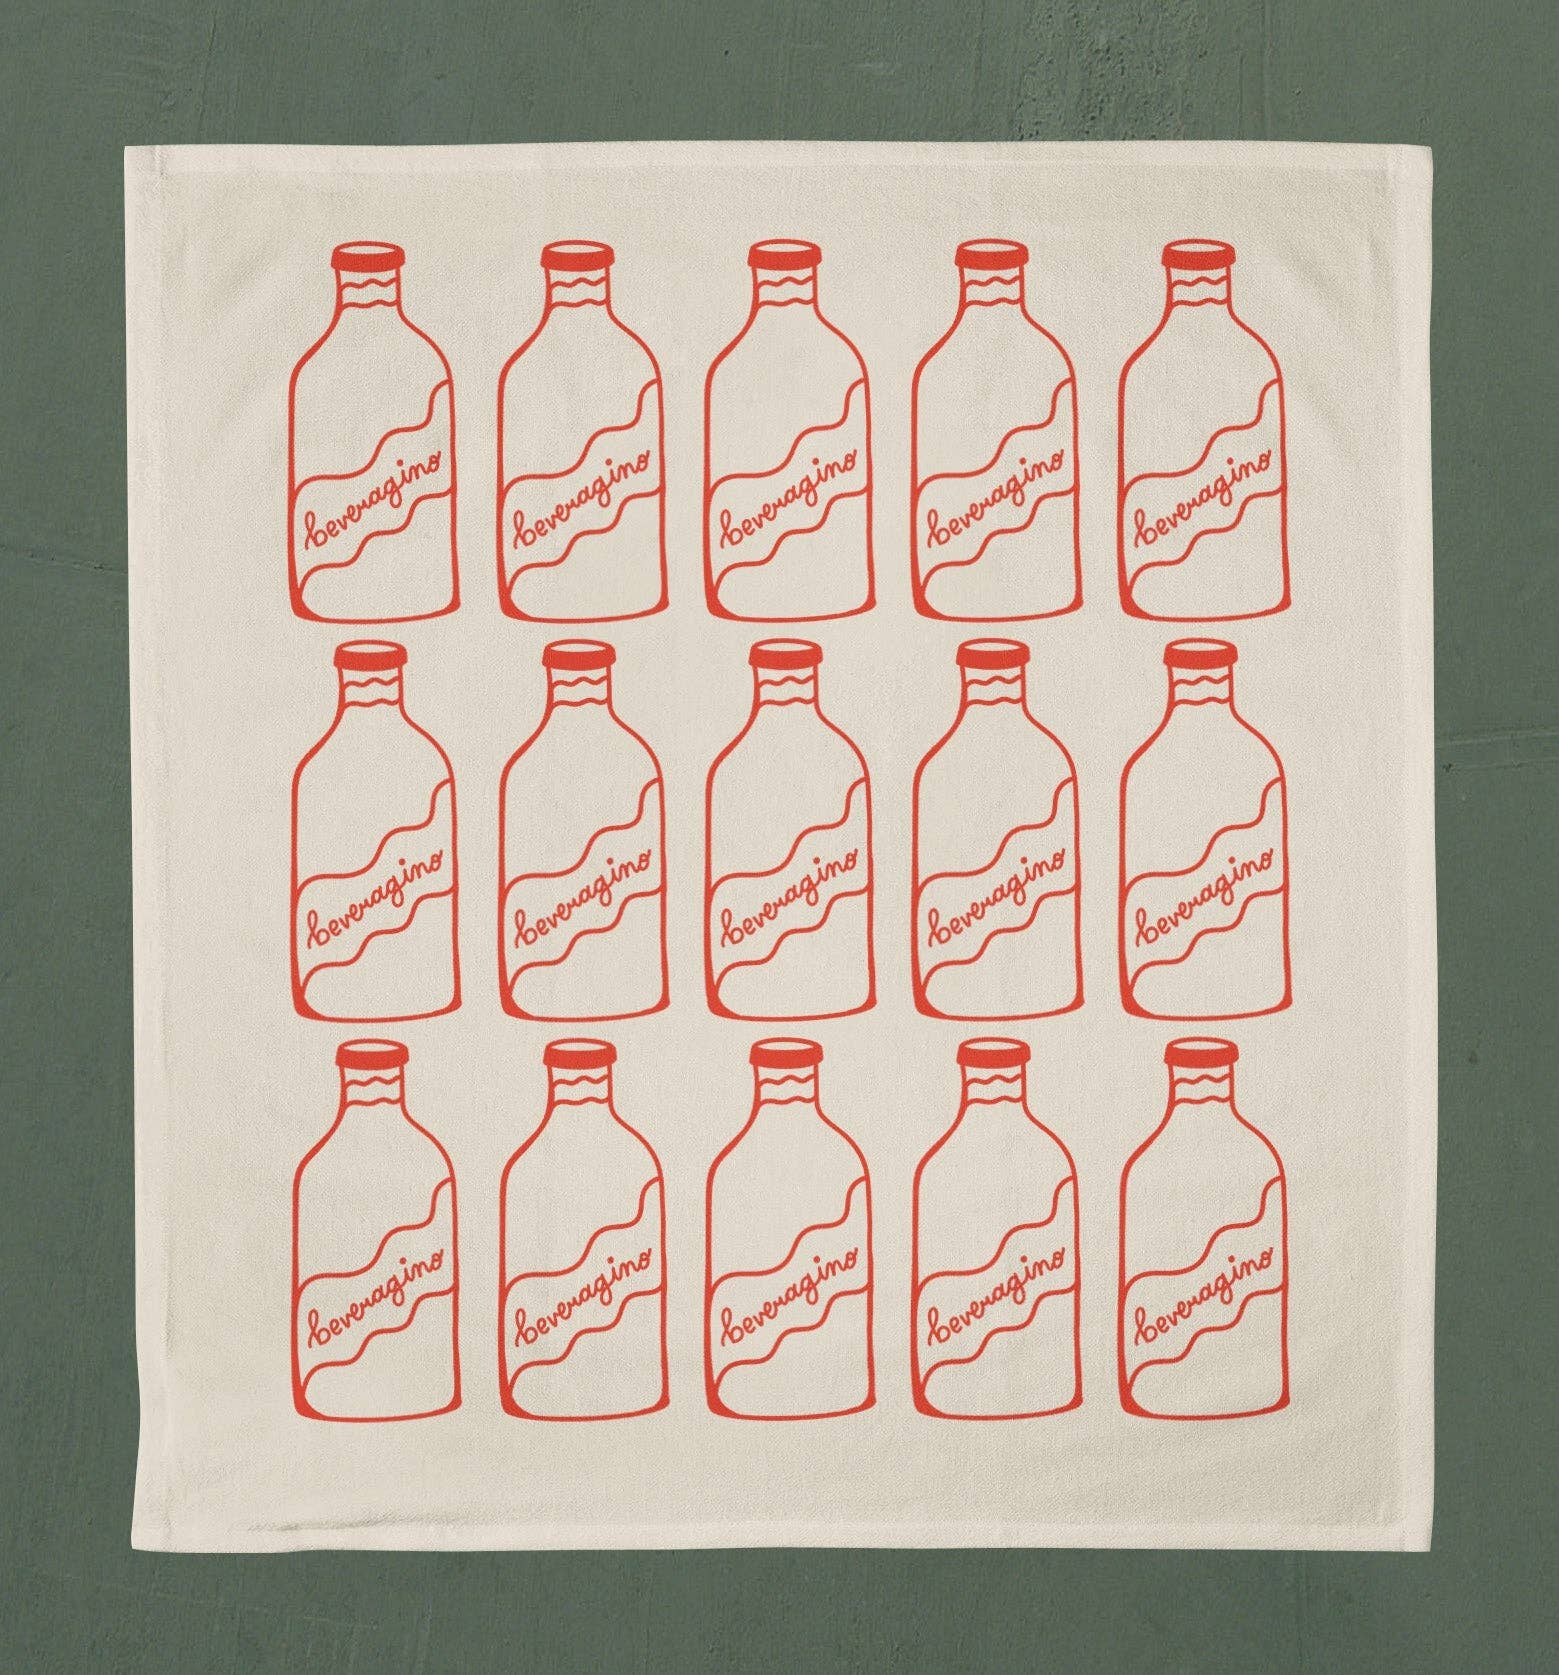 Natural colored tea towel with 3 rows of 5 bottles printed in red ink that read "beveragino" on it 